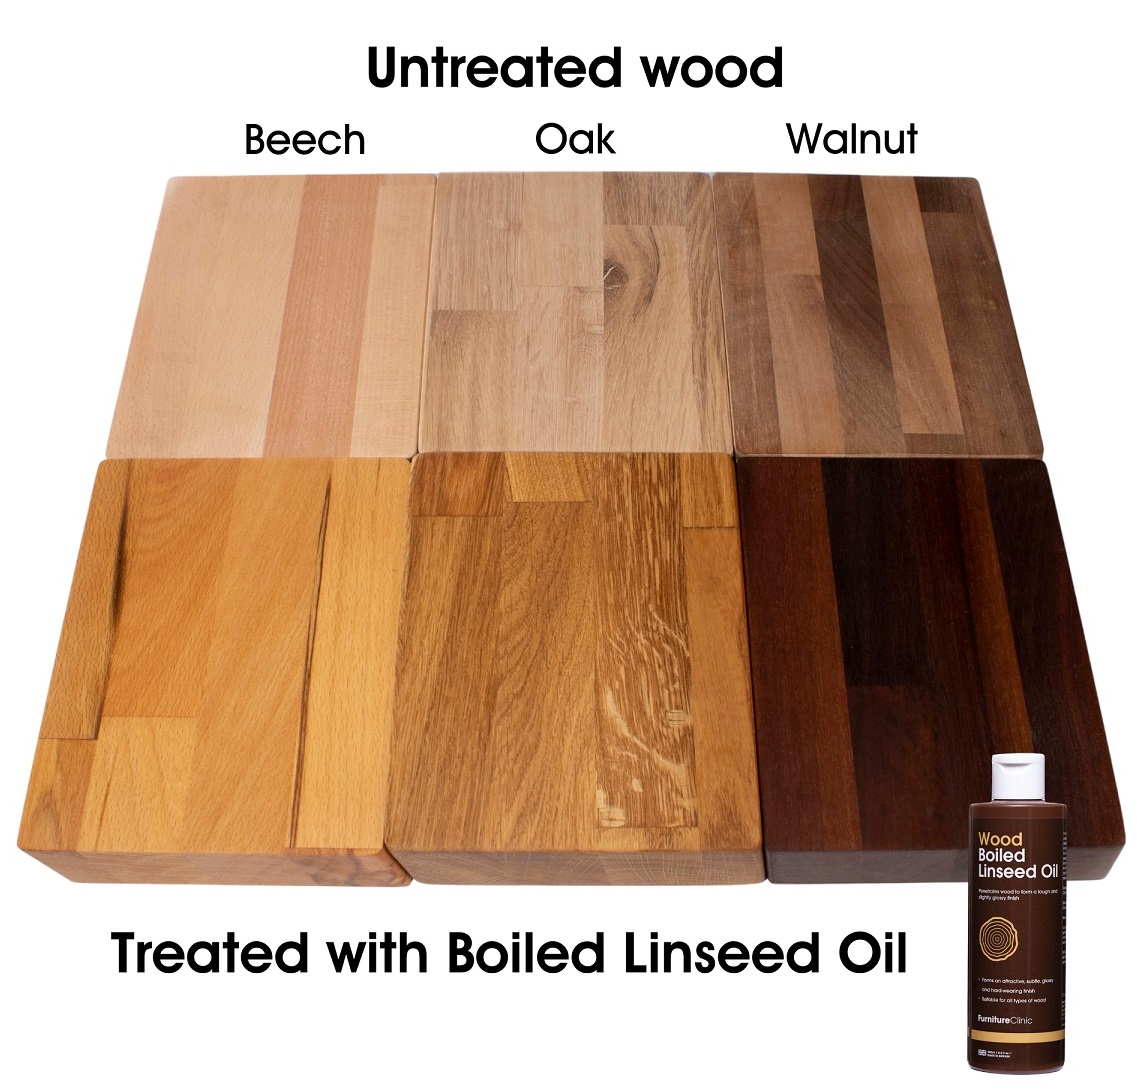 Boiled Linseed Oil Comparison